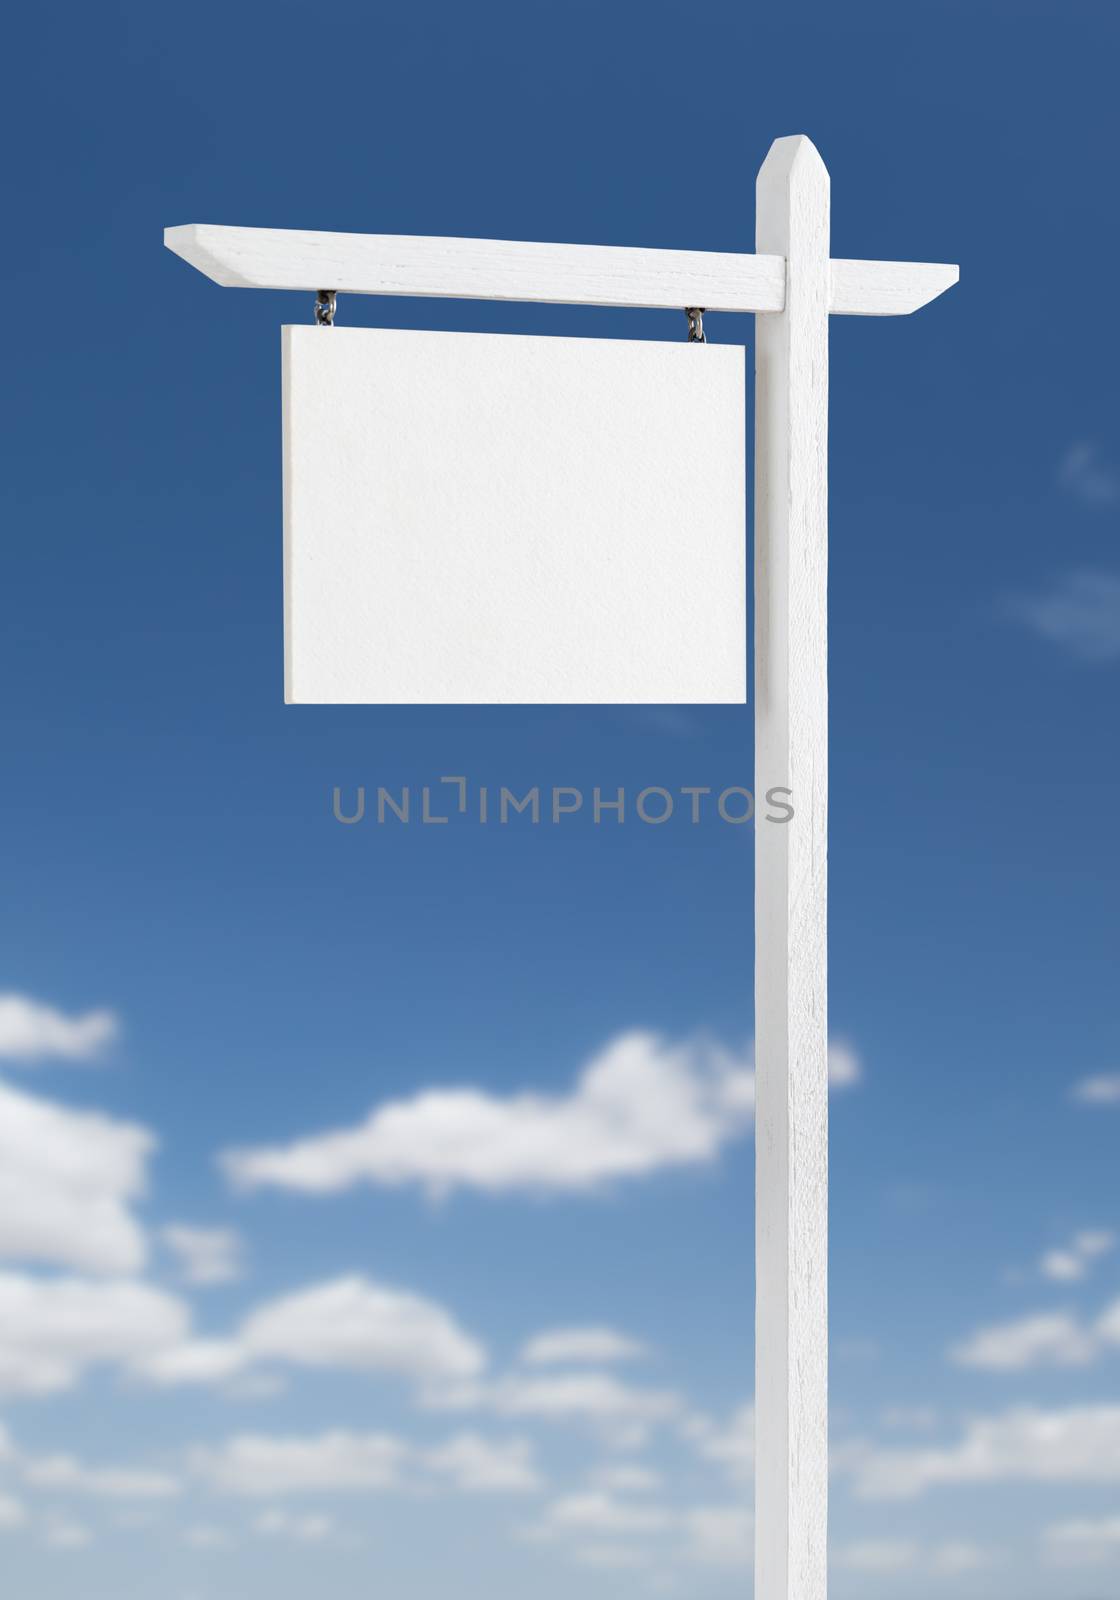 Blank Real Estate Sign Over A Blue Sky with Clouds. by Feverpitched